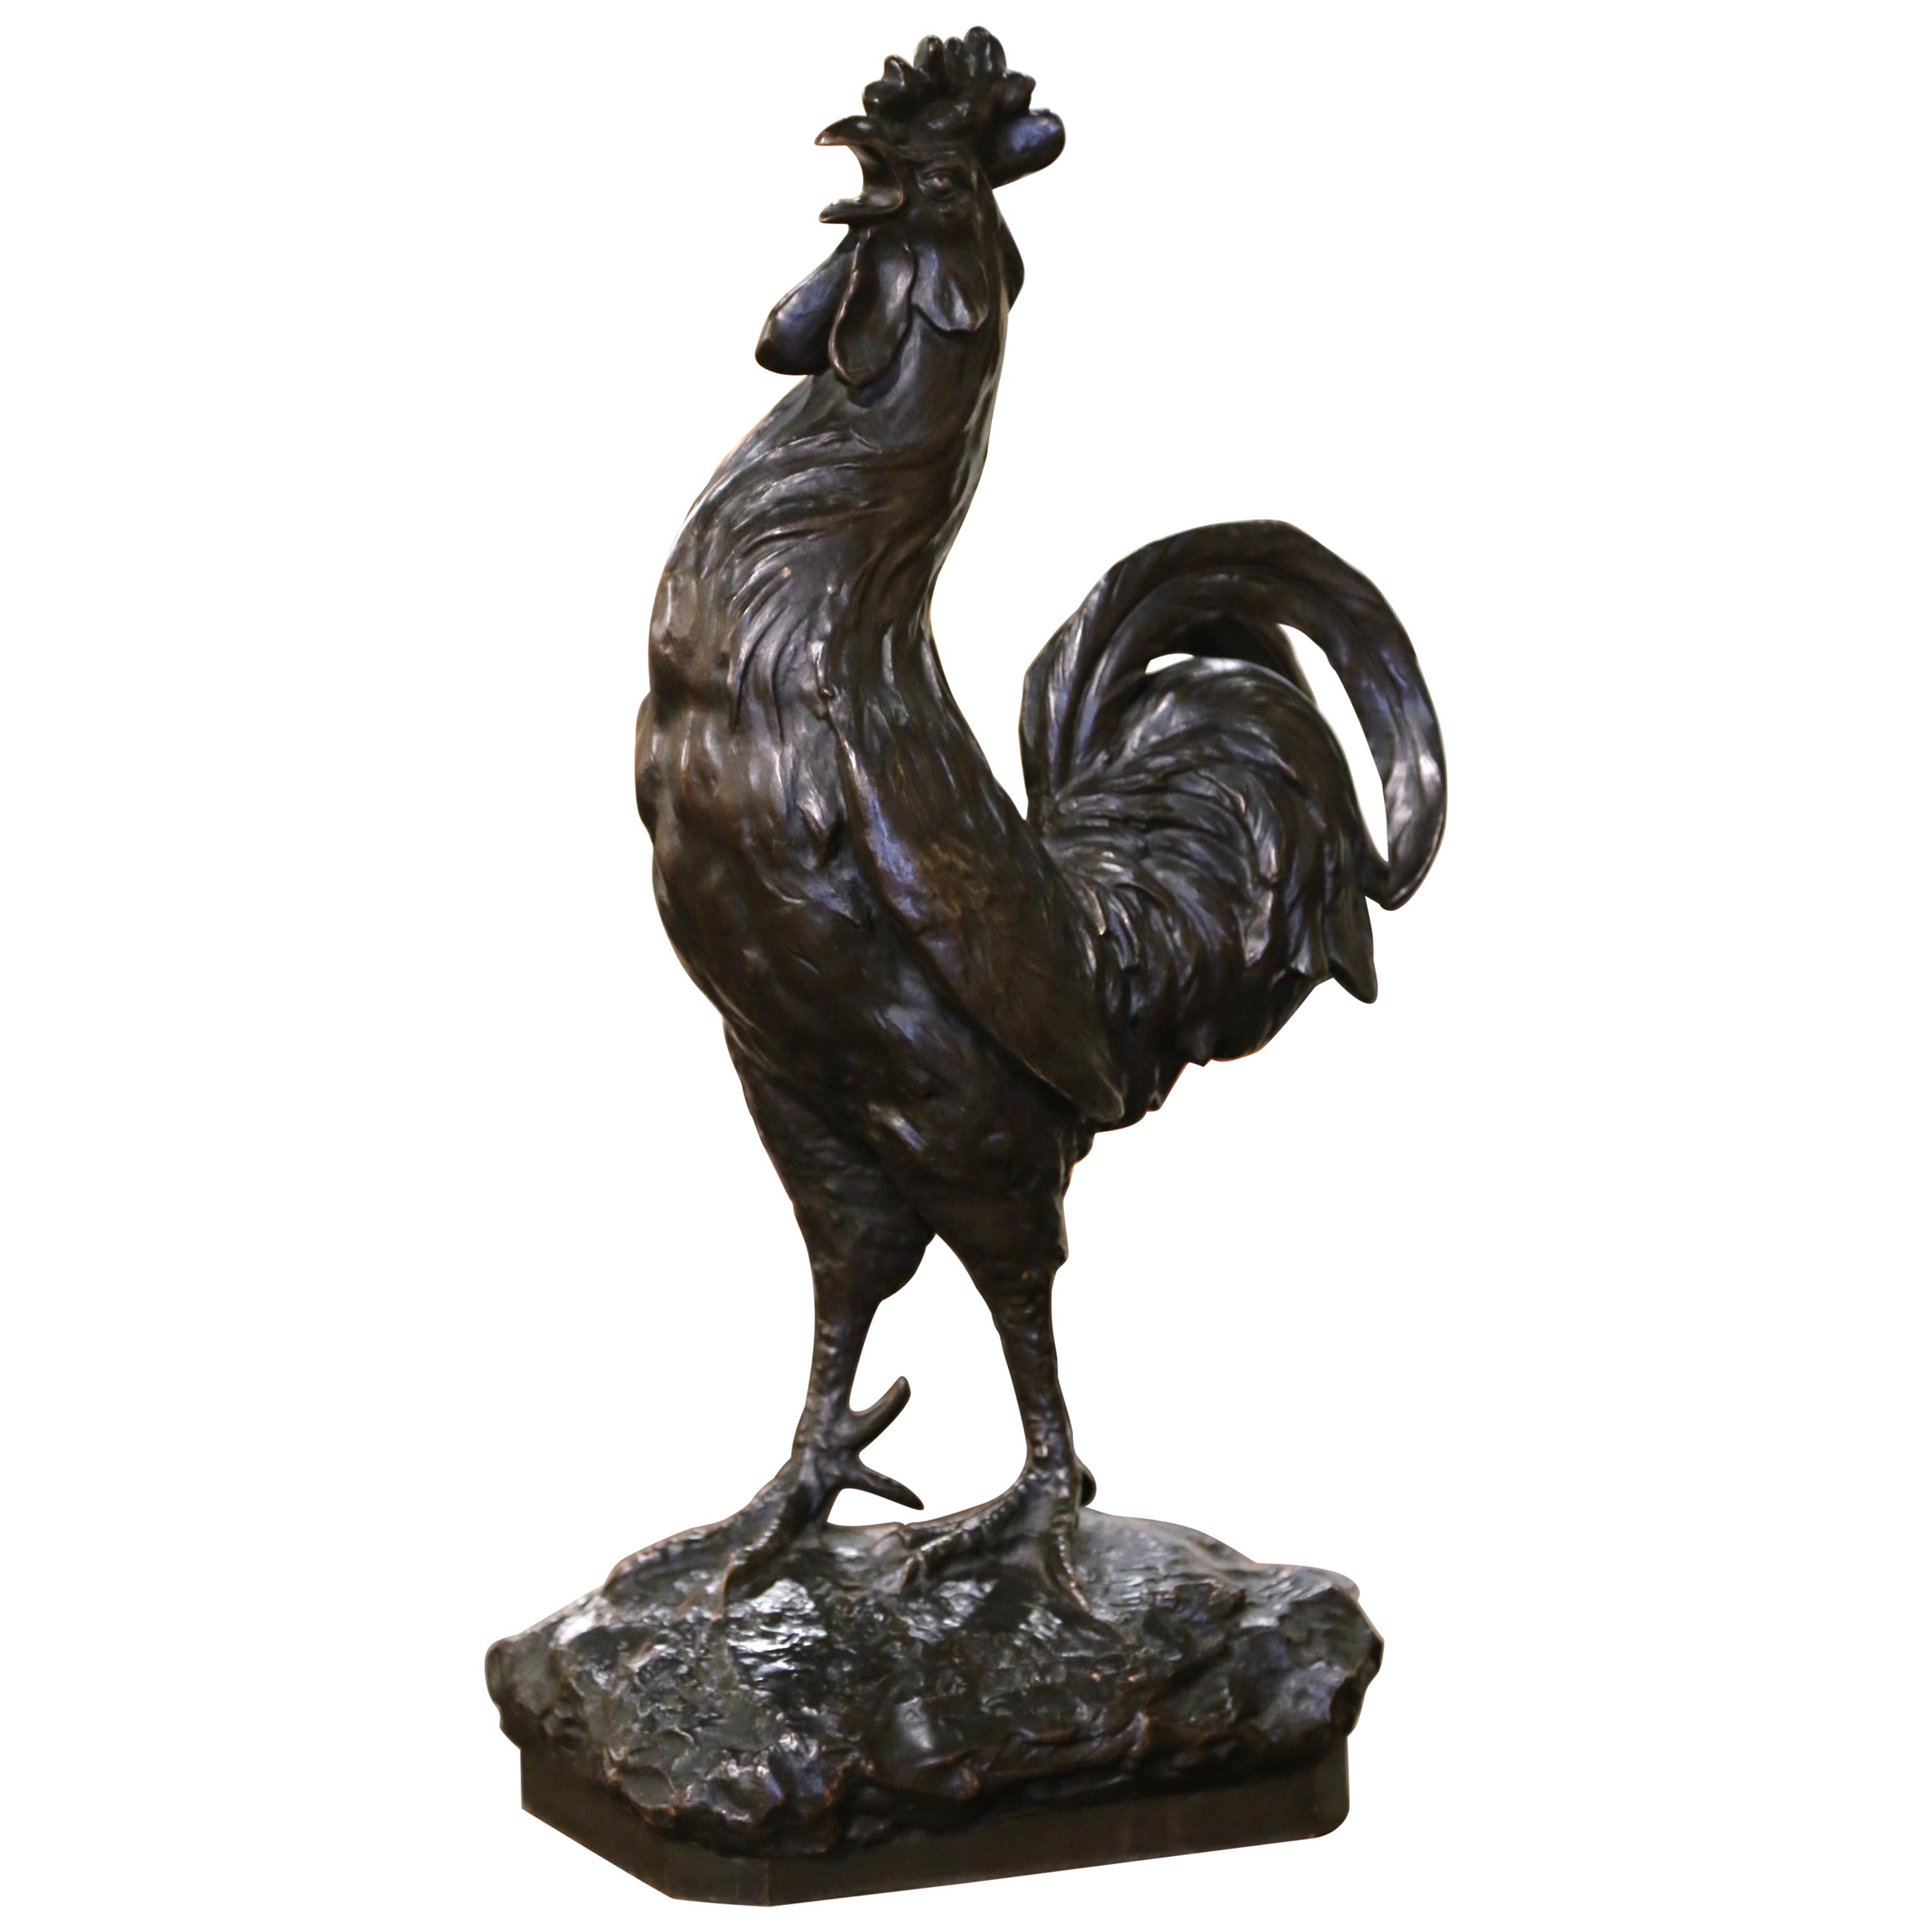 19th Century French Patinated Bronze Rooster Sculpture Signed J. Rabiant